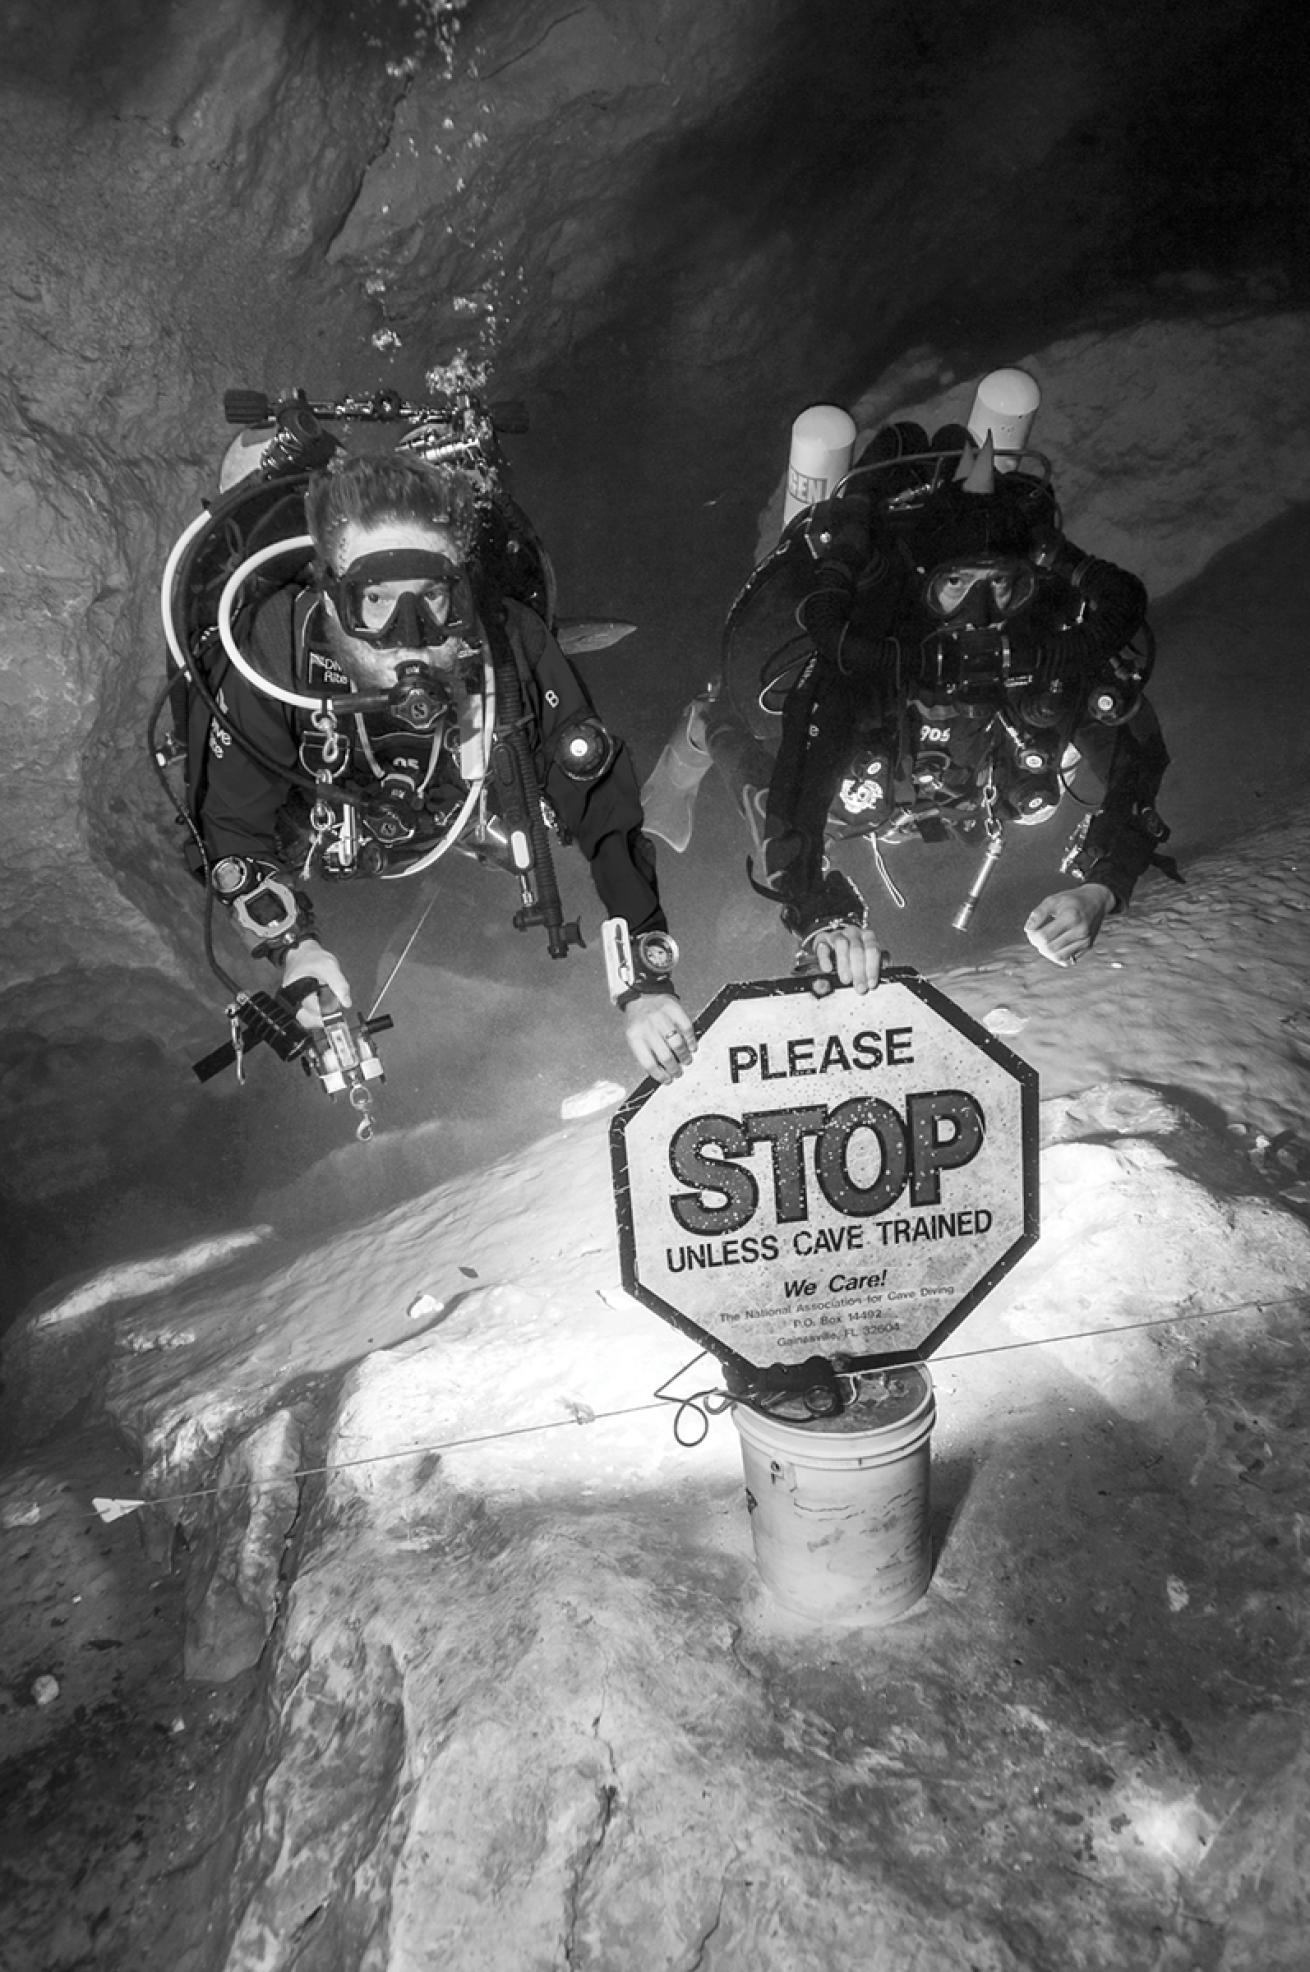 Jill Heinerth cave diving with buddy and sign